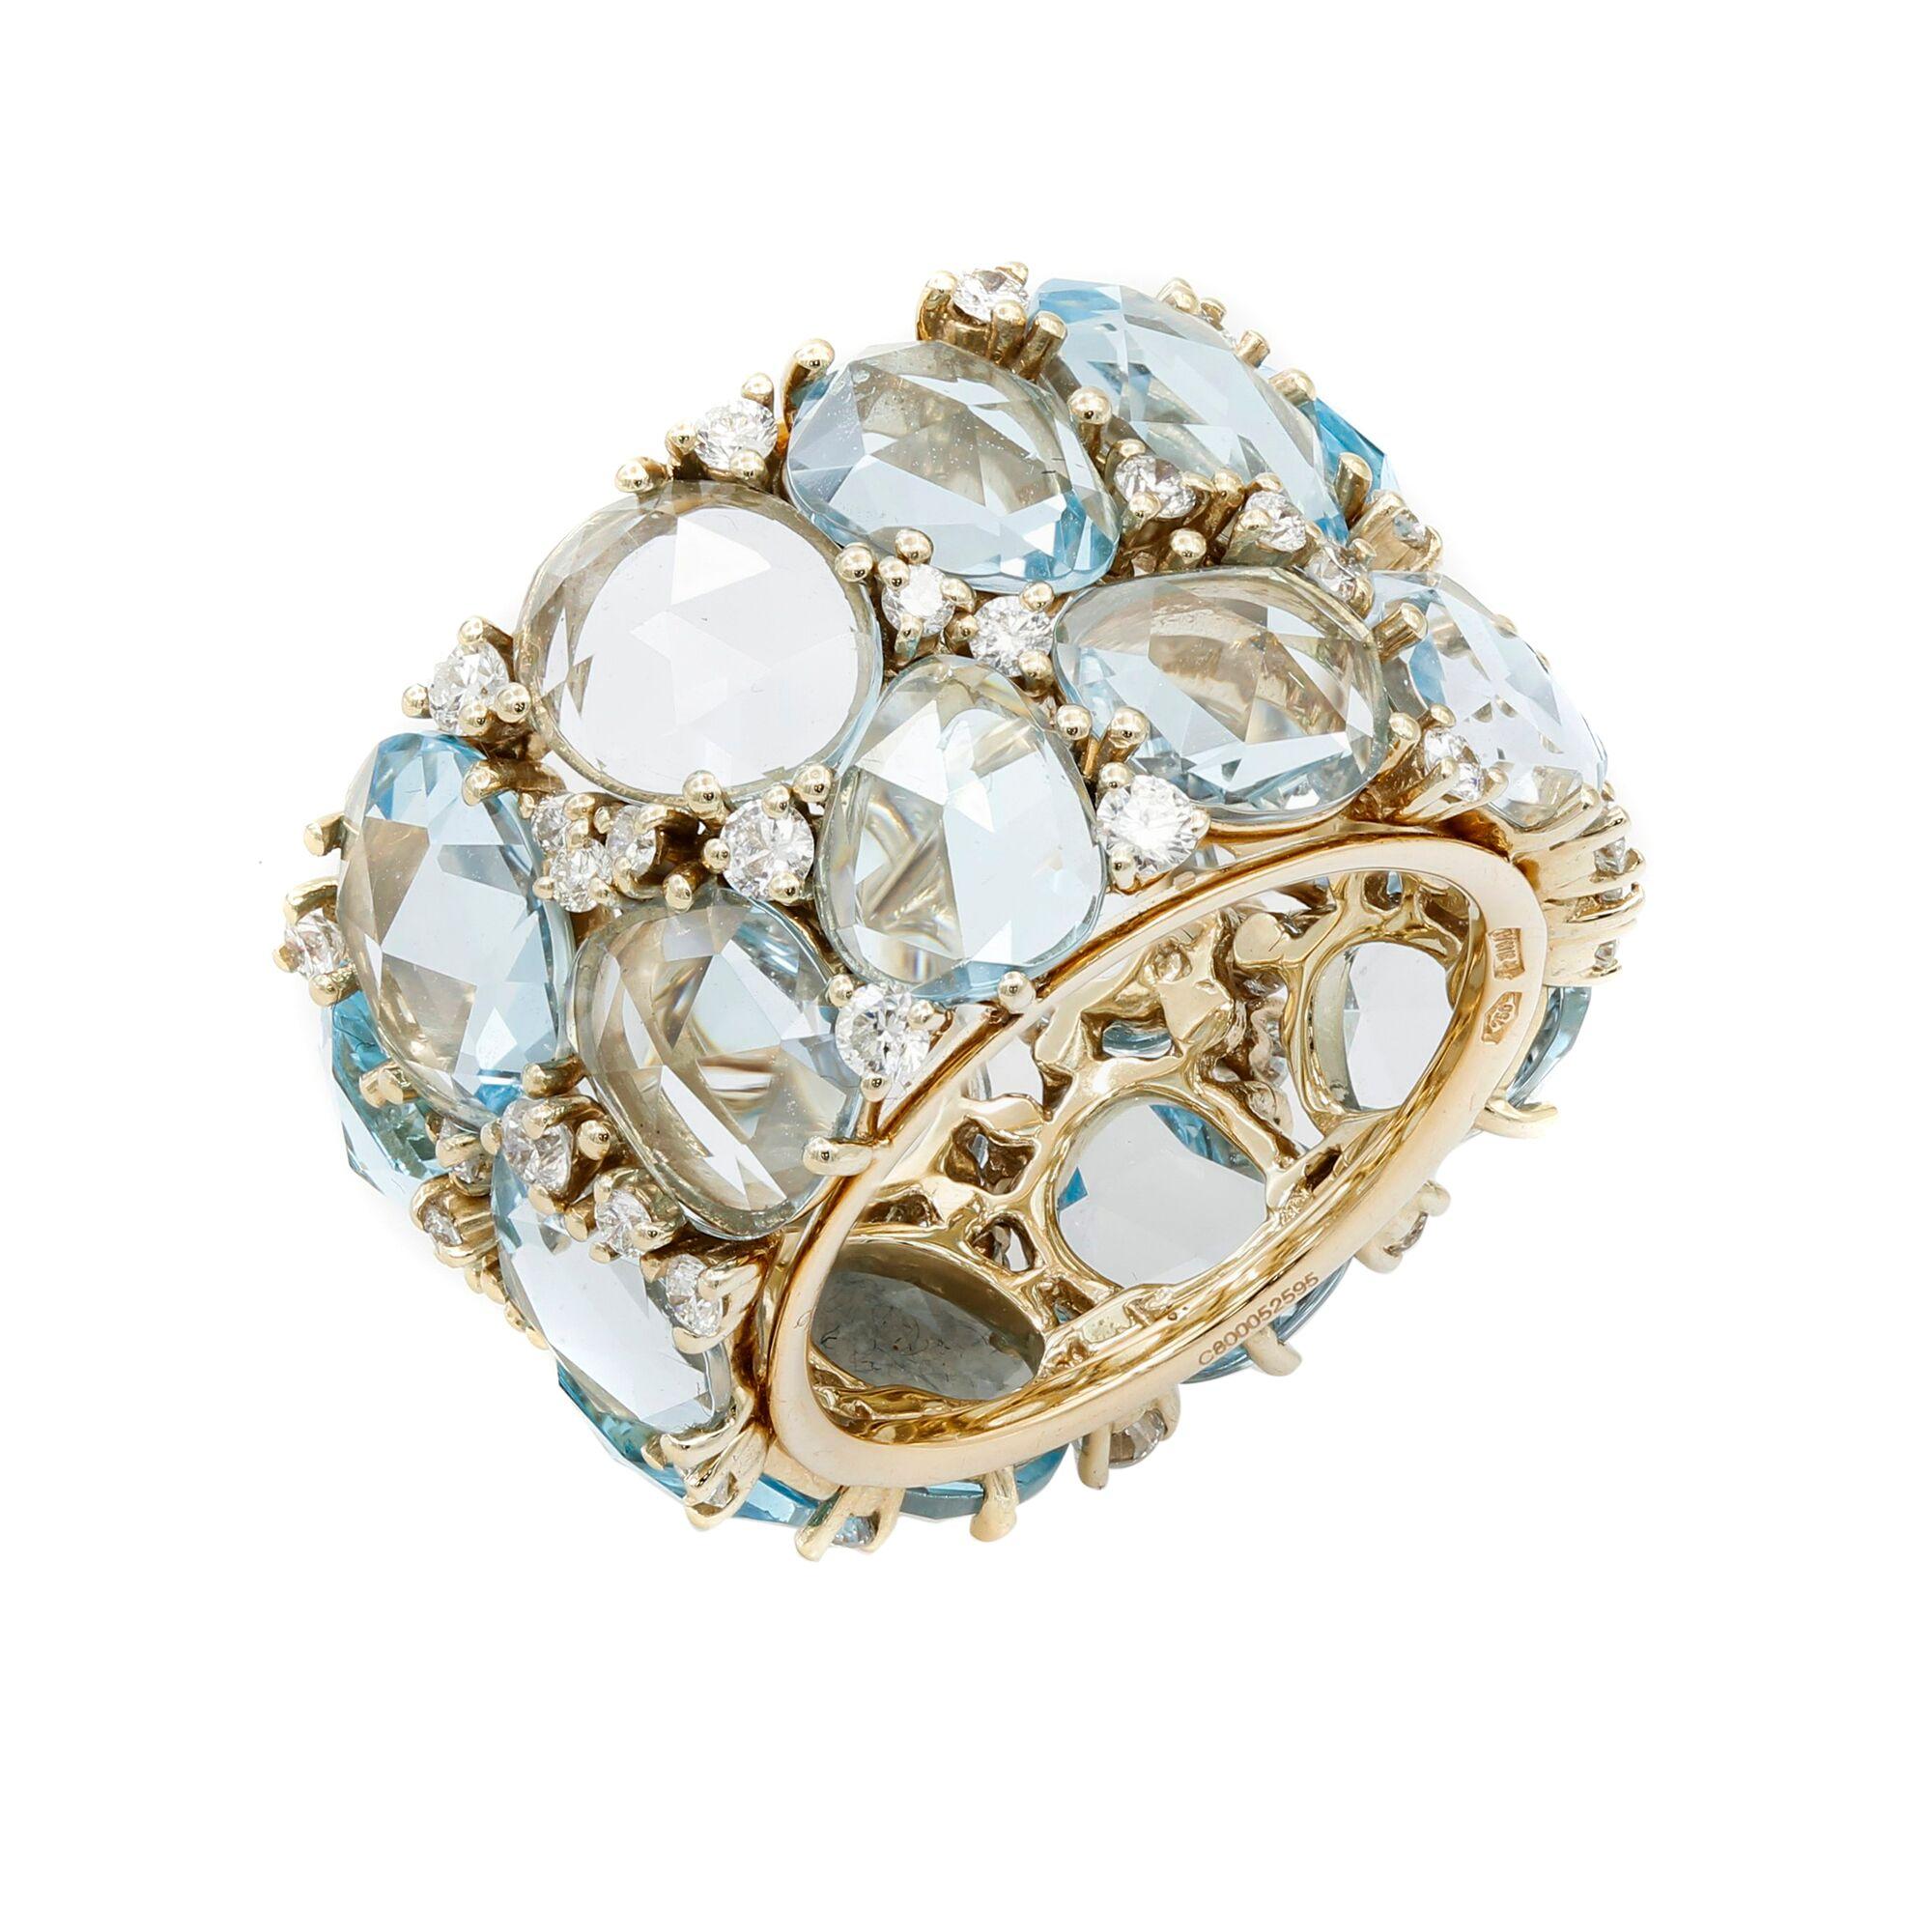 Lulu 18k Blue Topaz Diamond Wide Band Ring, Size 7.
Pomellato stacked band ring from the Lulu Collection.
Approx. 0.6